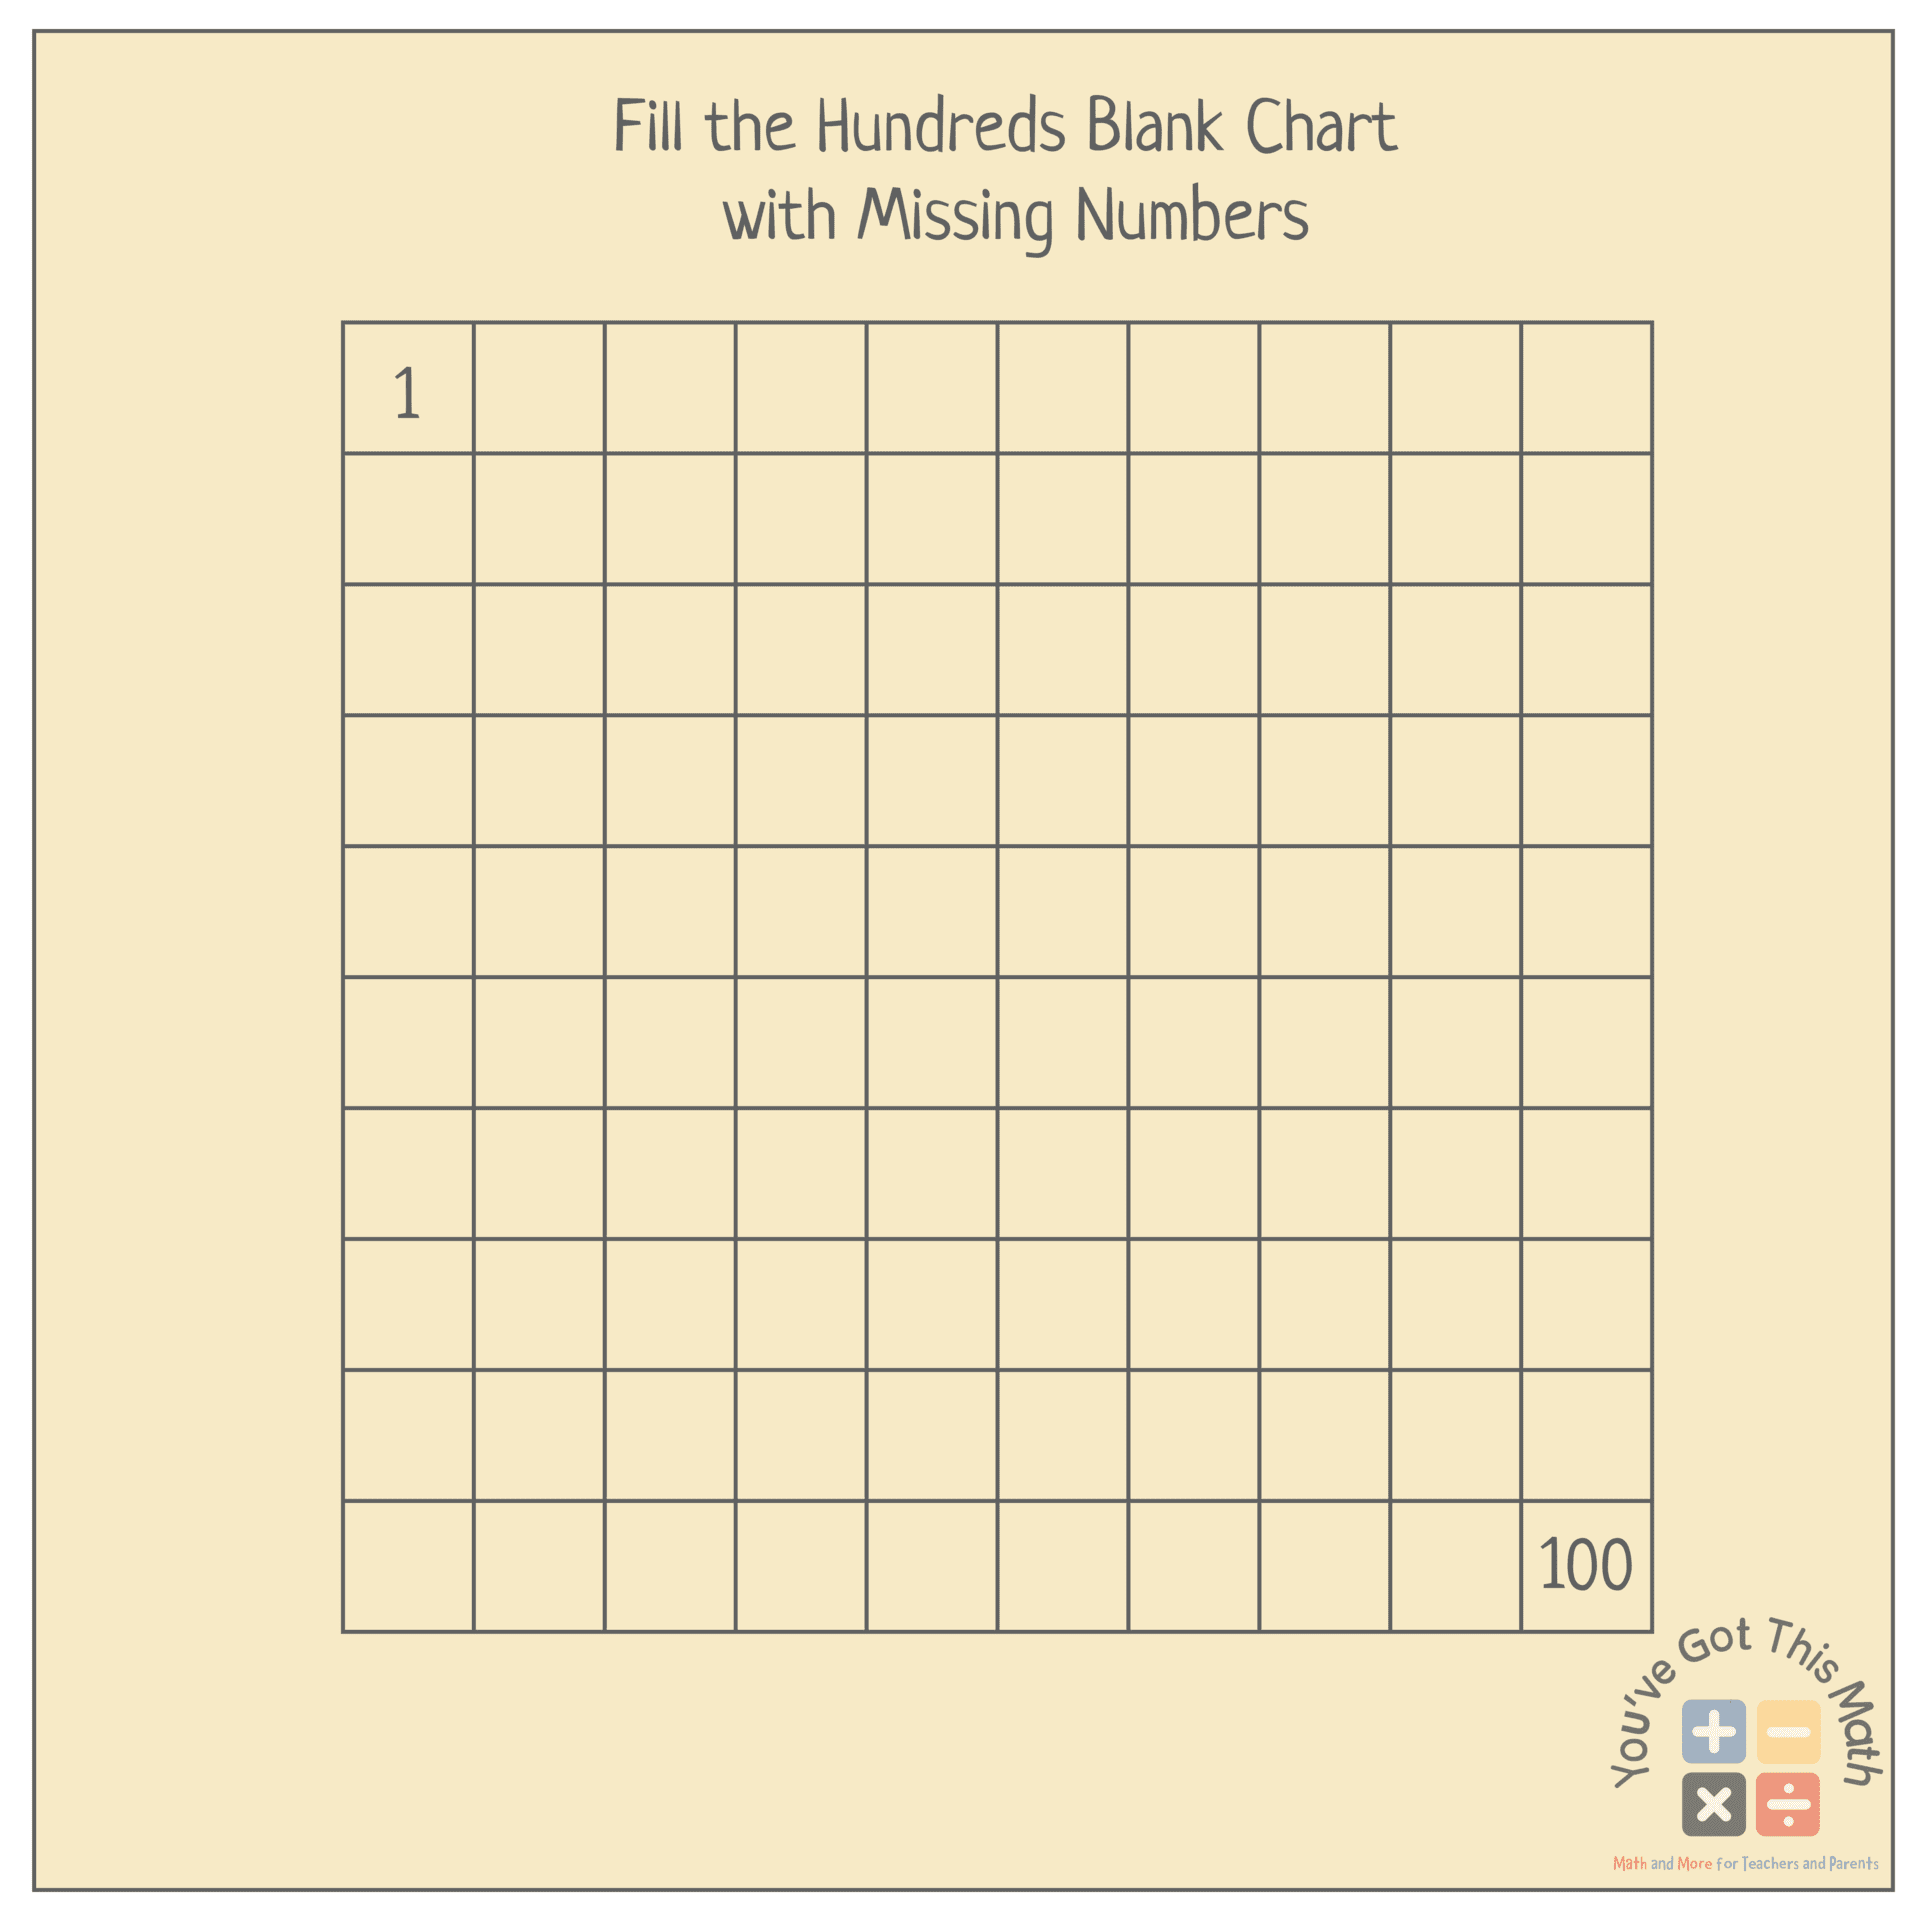 Fill the hundreds blank chart with missing numbers 